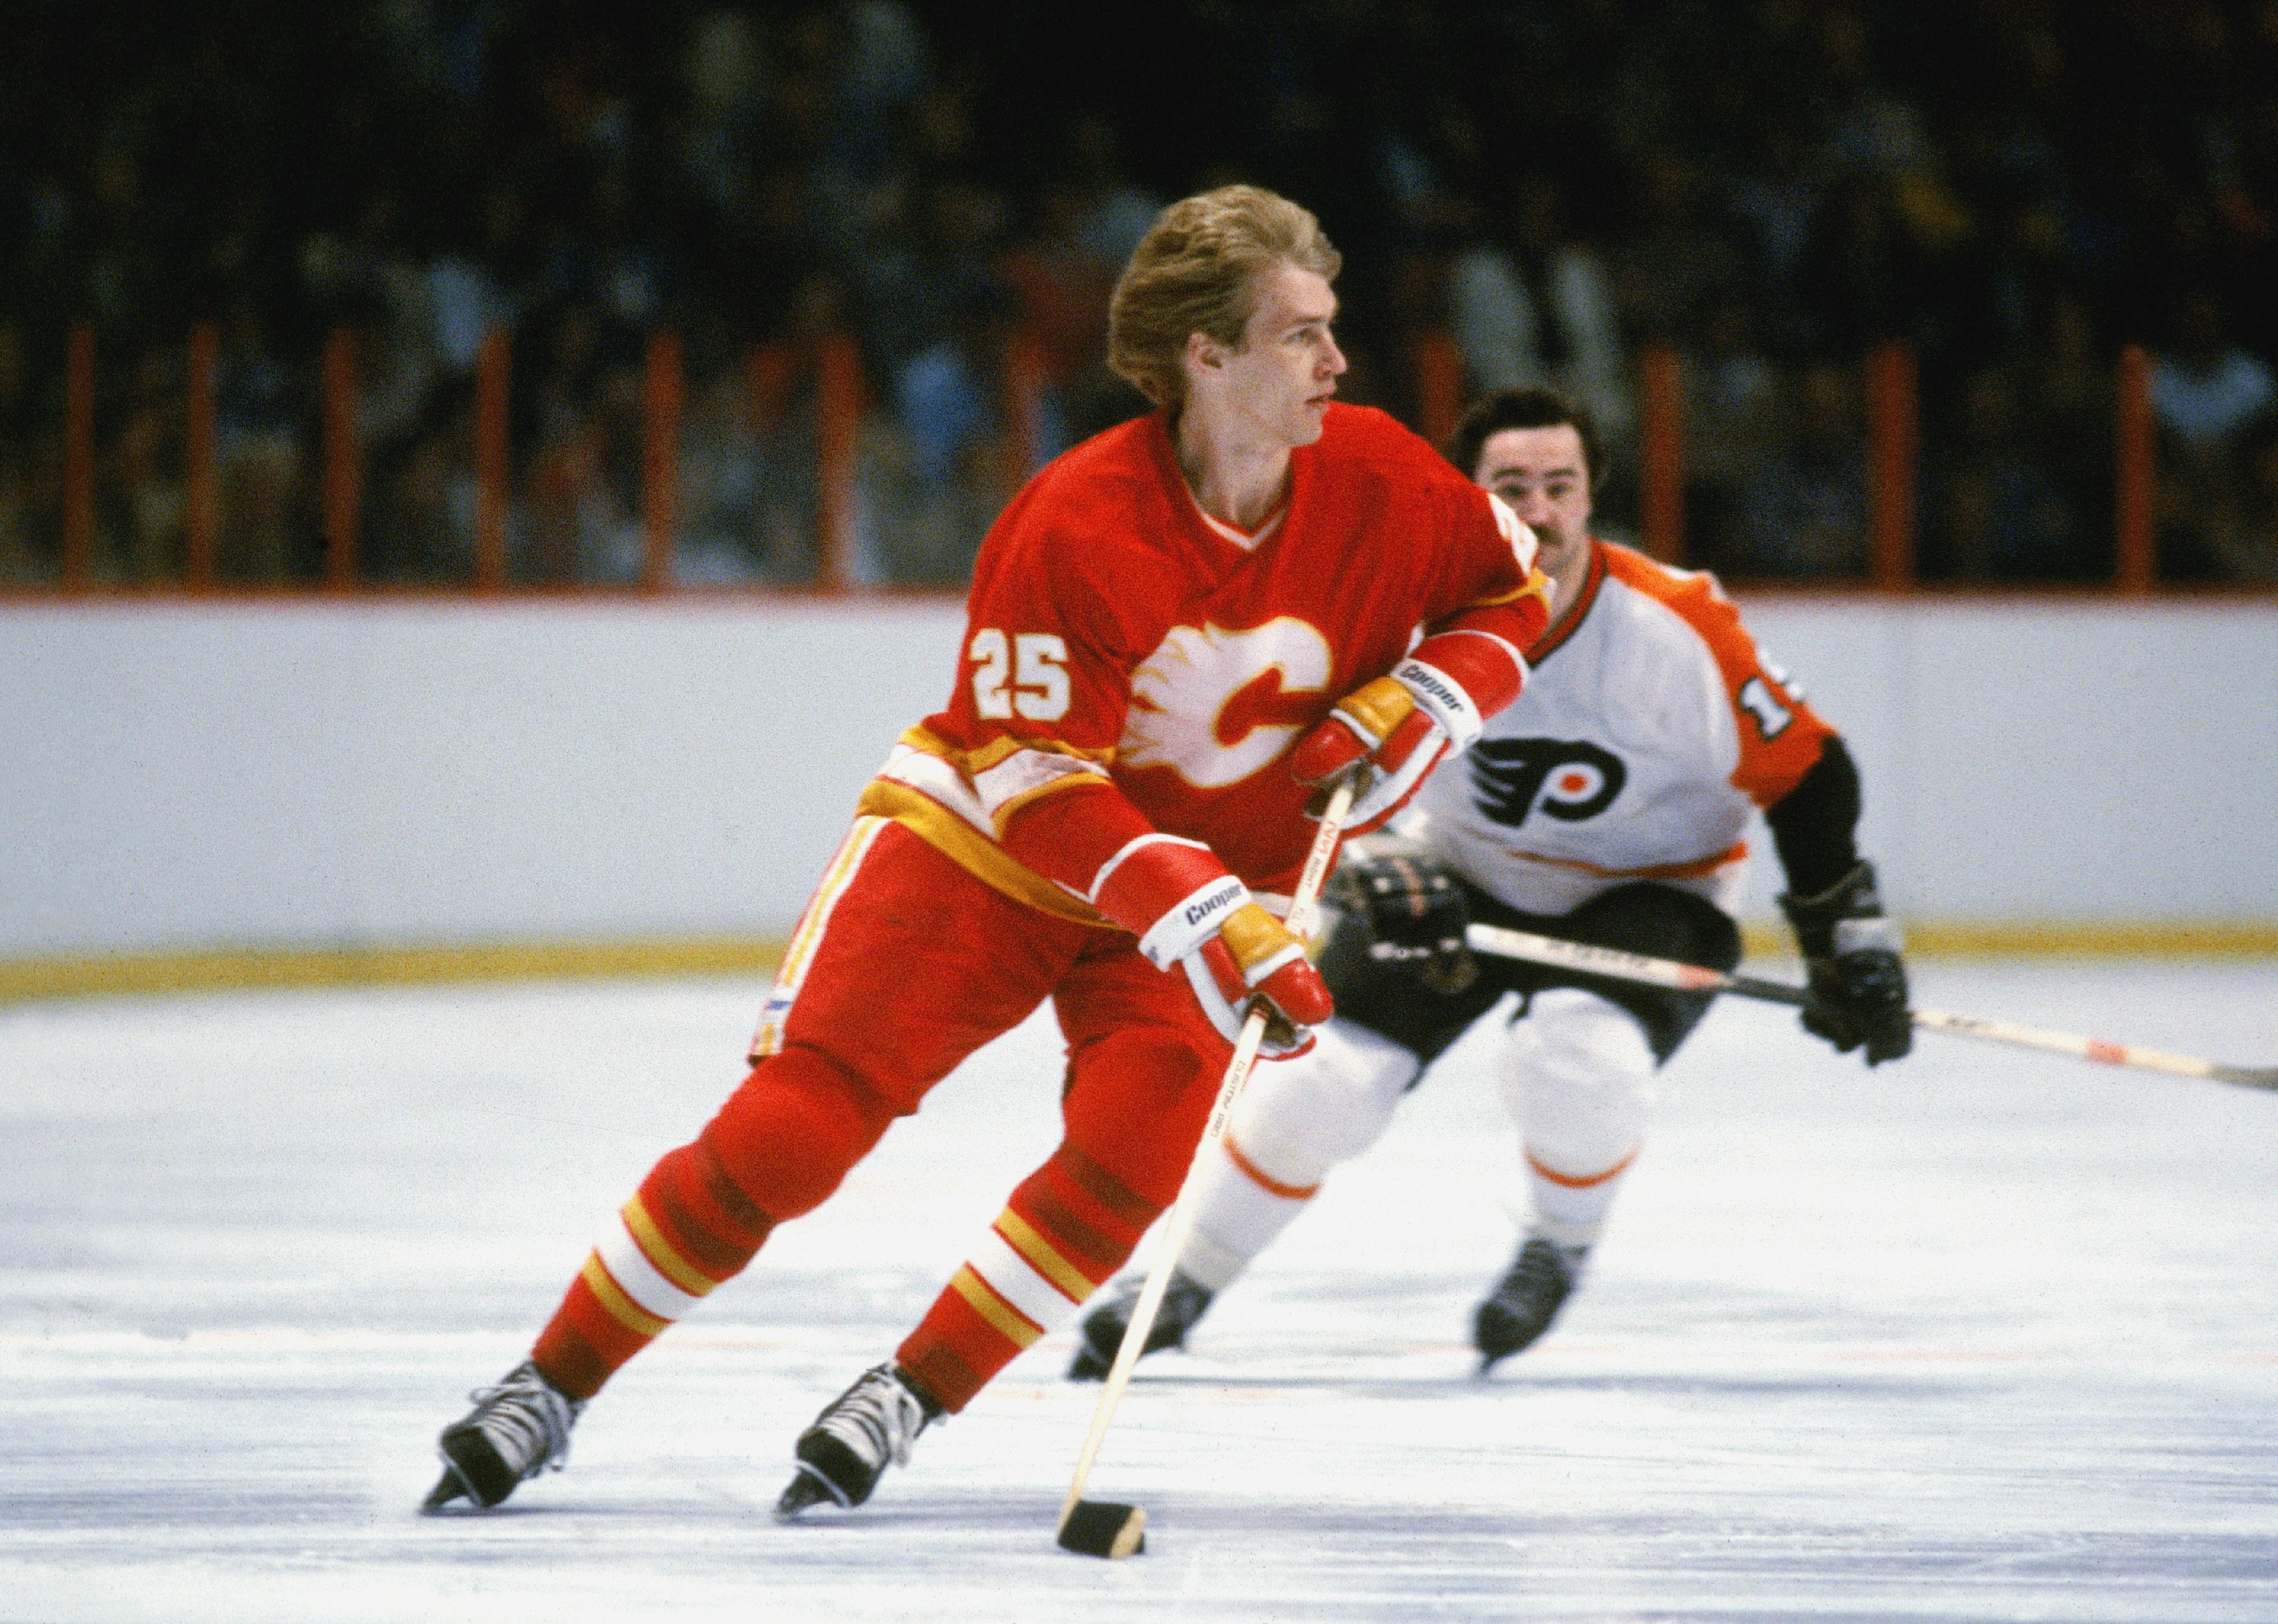 Willi Plett skates without a helmet on the ice in a game.